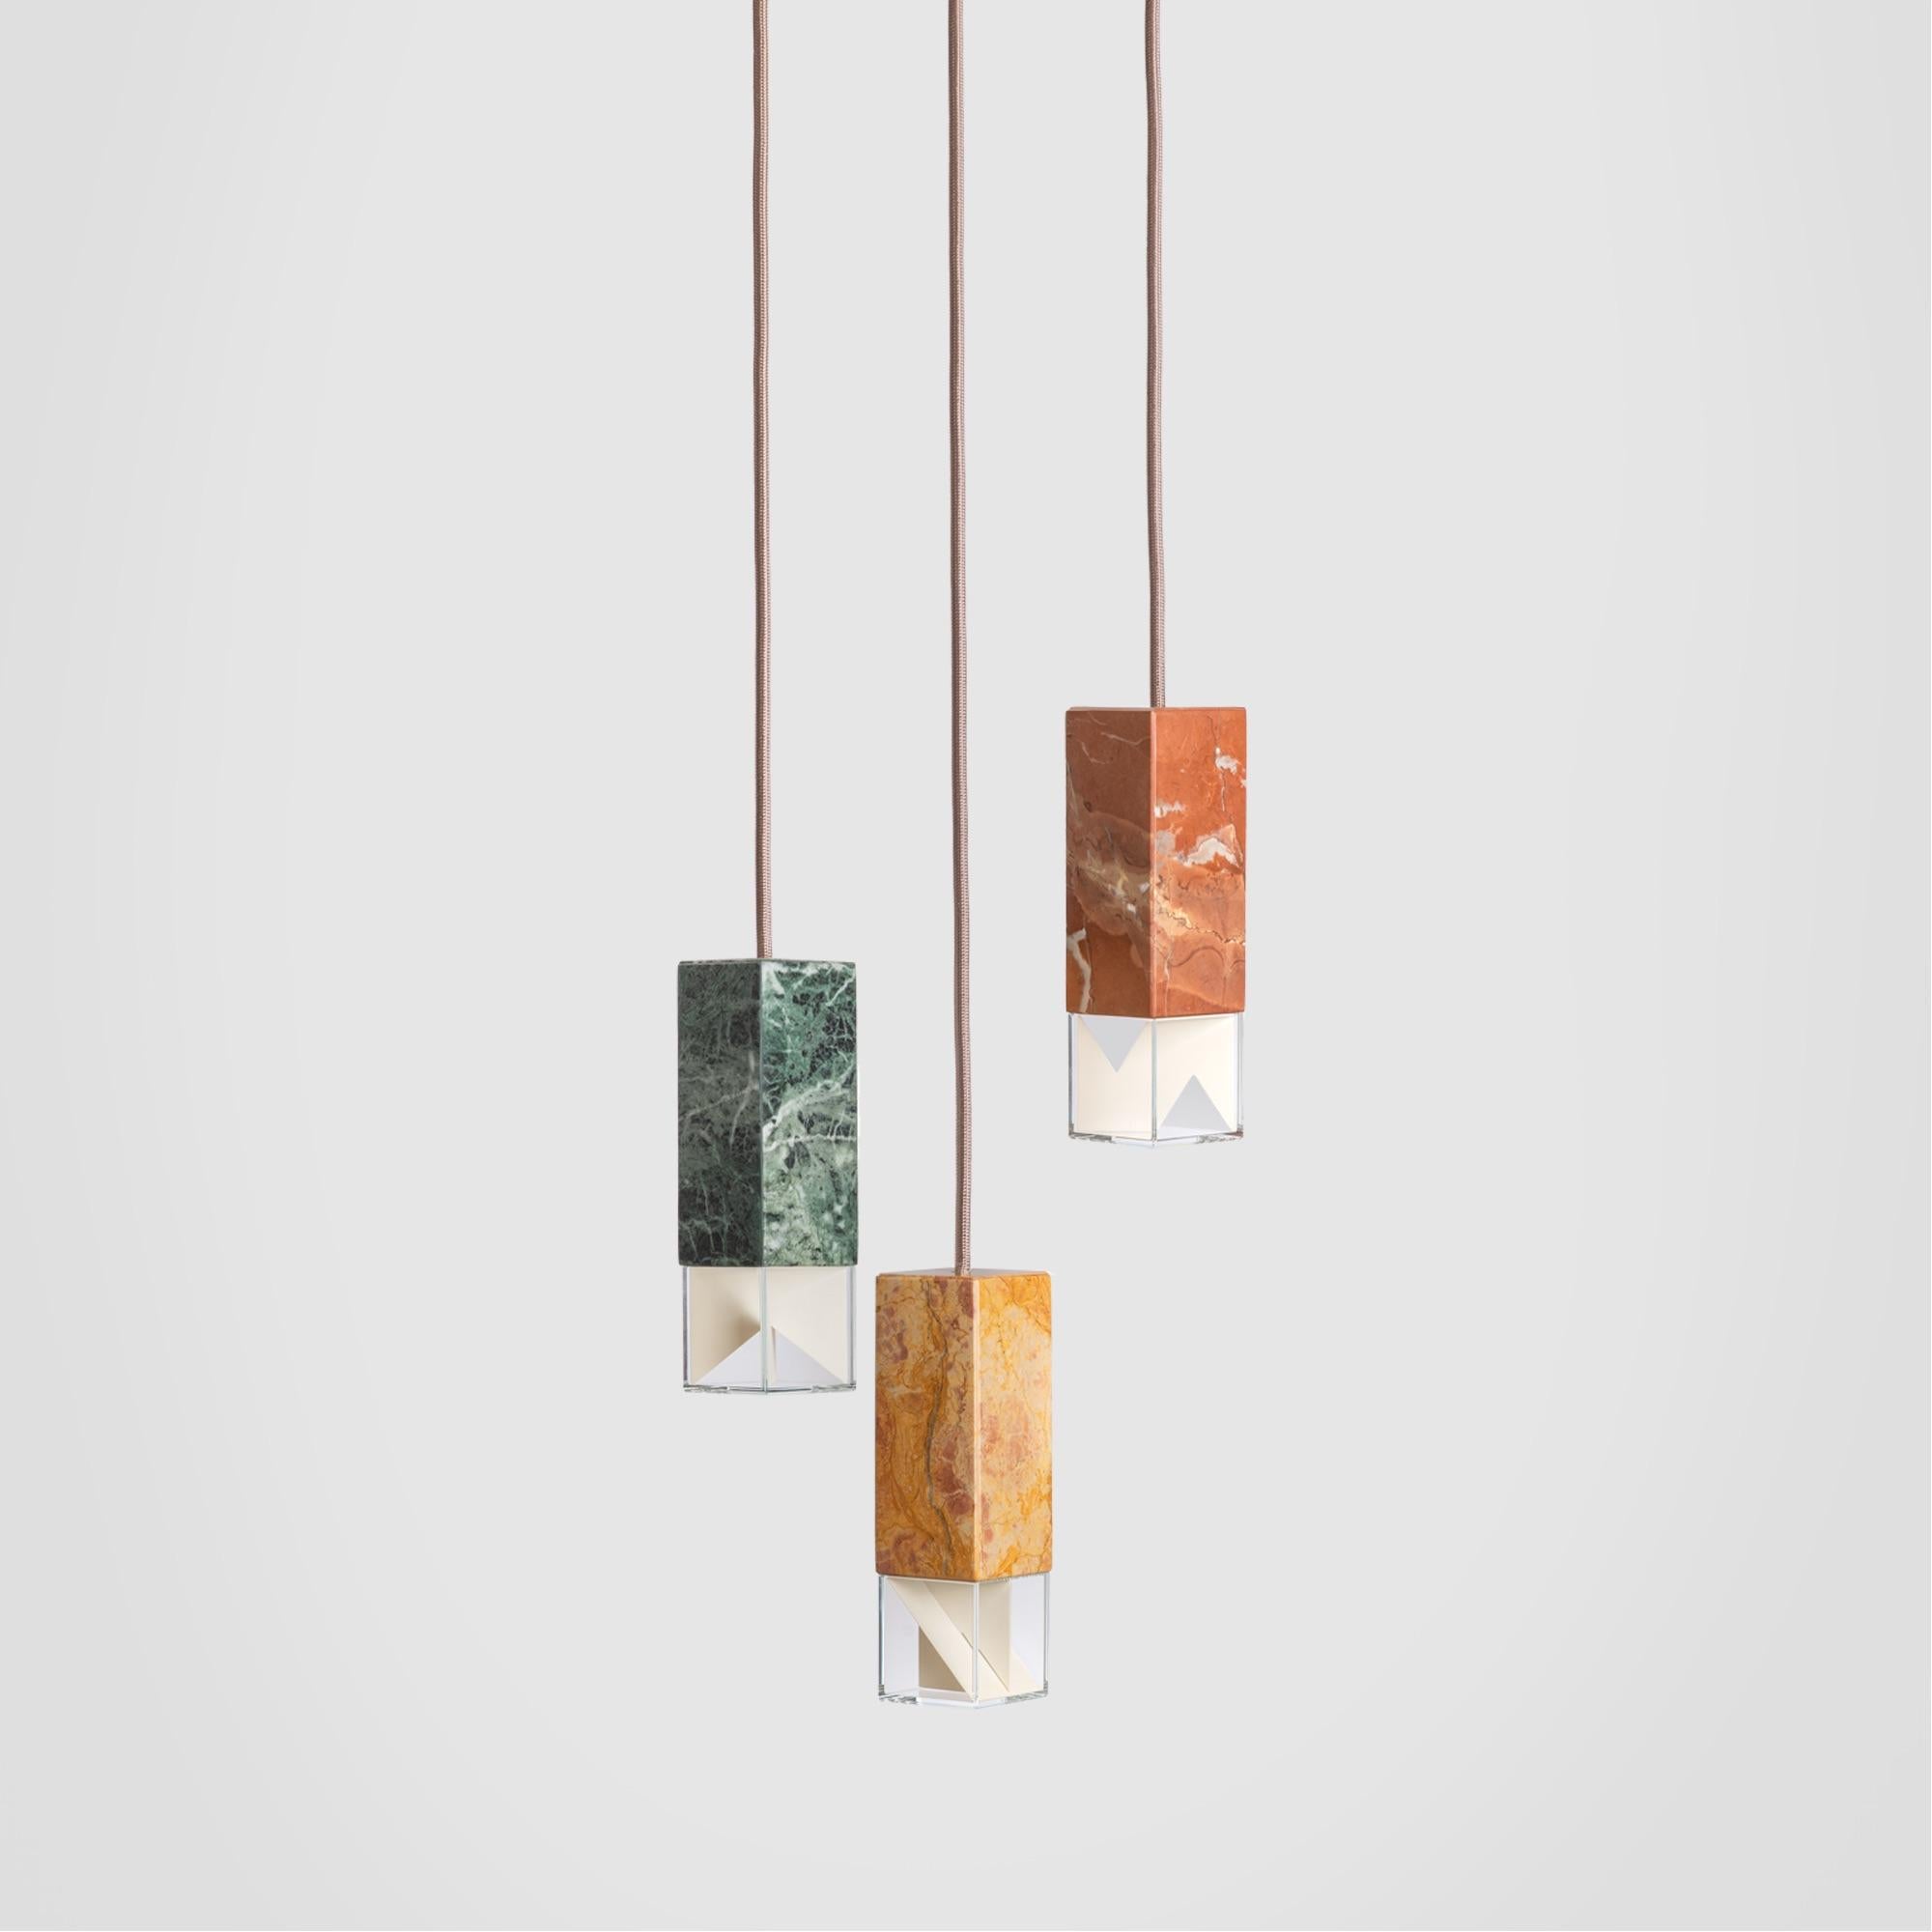 About
Contemporary Marble Trio Chandelier Handcrafted in Italy by Formaminima

Lamp/One Chandelier from Colour Edition
Design by Formaminima
Chandelier
Materials:
Body lamps handcrafted in solid marble Red Collemandina, translucent Green Alps and